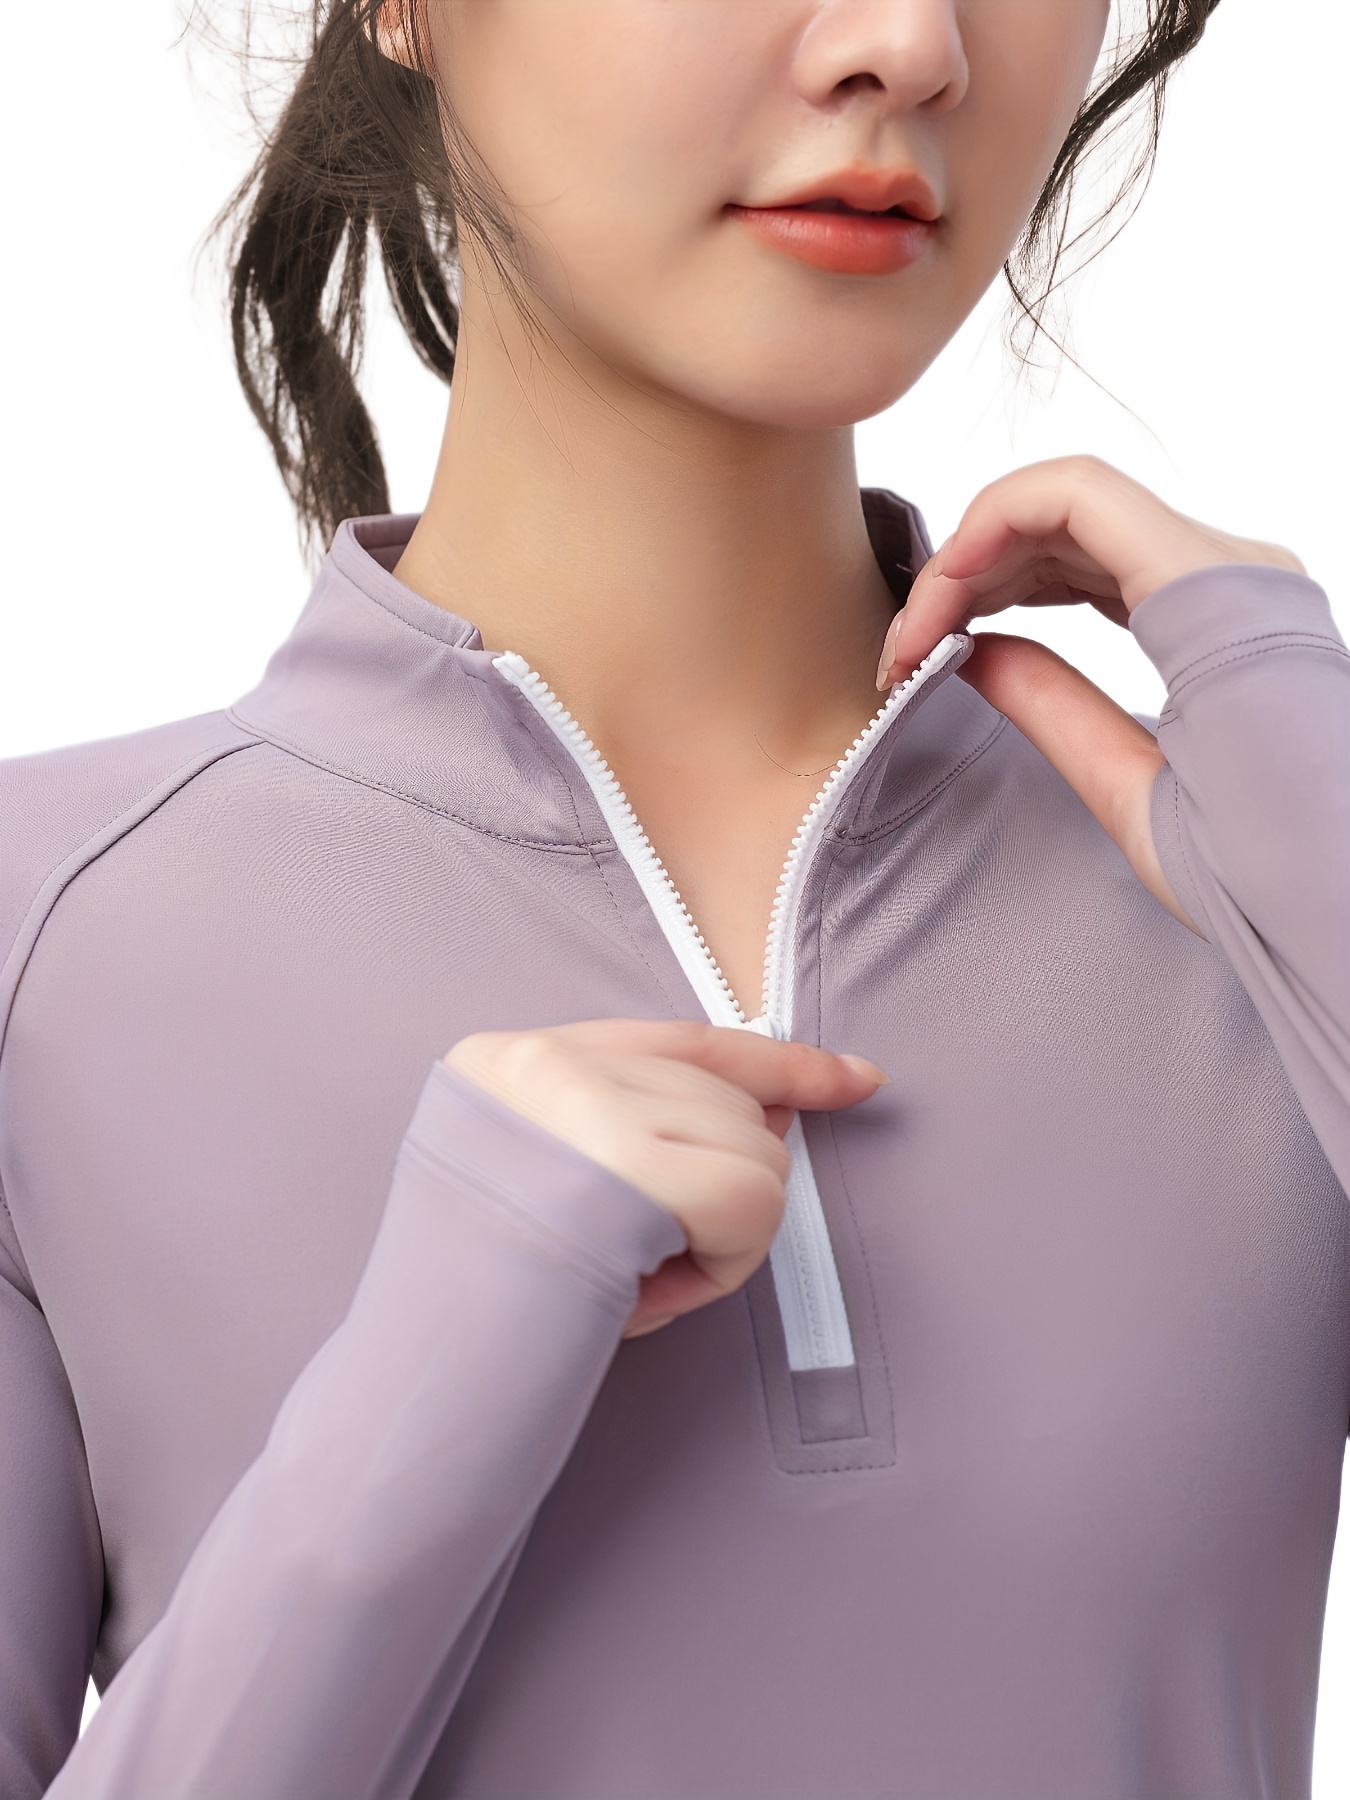 Women's Long Sleeves Athletic Shirts, 1/4 Zip Pullover Running Hiking  Workout Yoga Tops With Thumb Hole, Women's Activewear